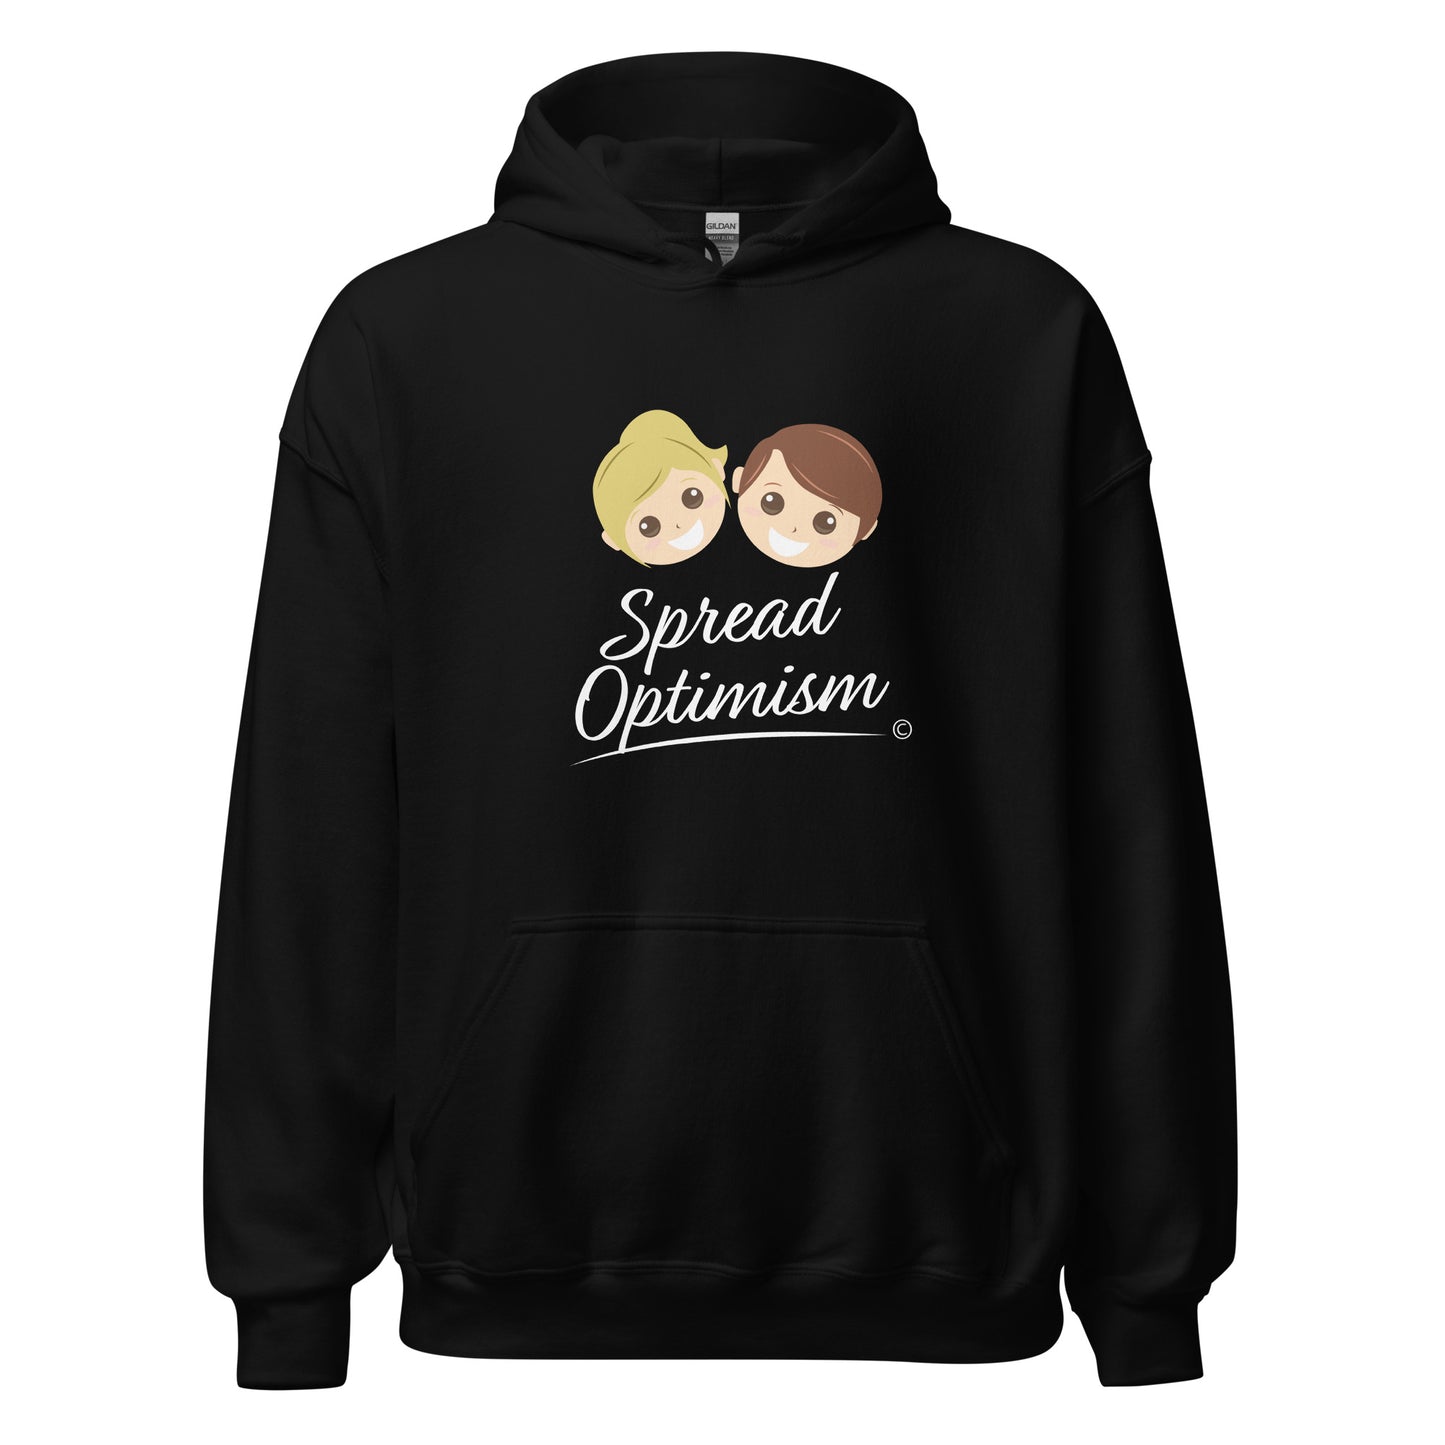 Outdoor unisex hoodies for him and her- Black